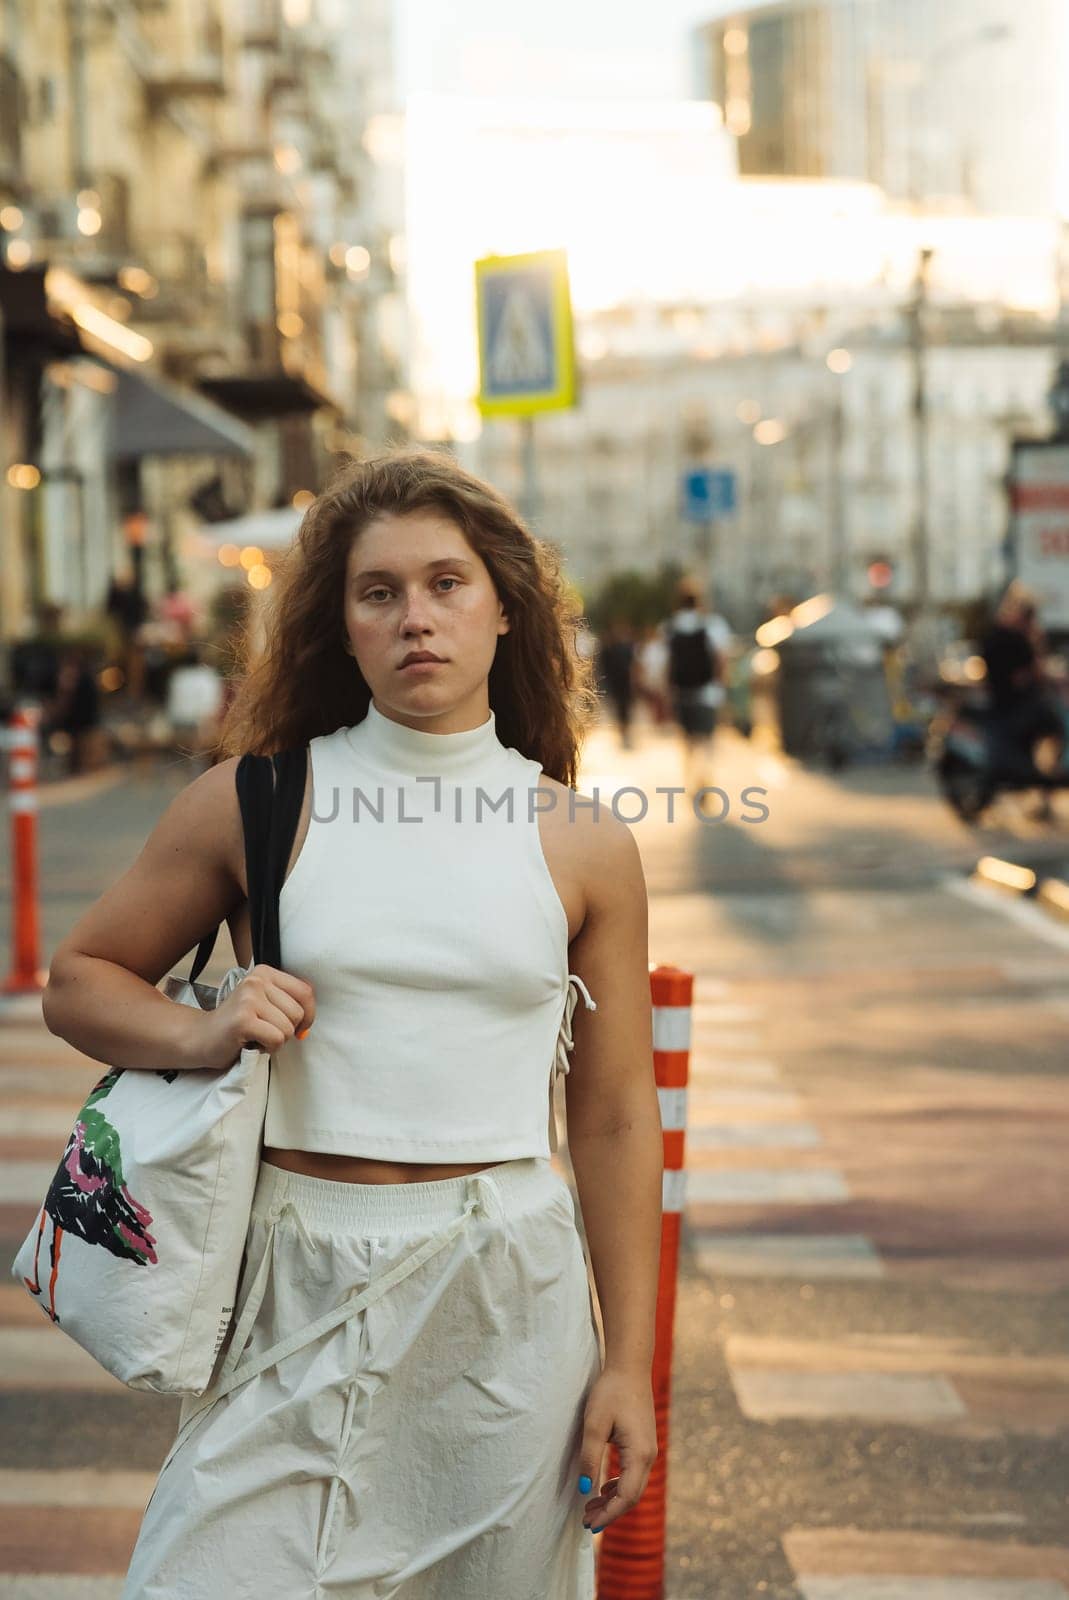 A chic girl wearing white clothes and sporting curly hair on the city streets. High quality photo